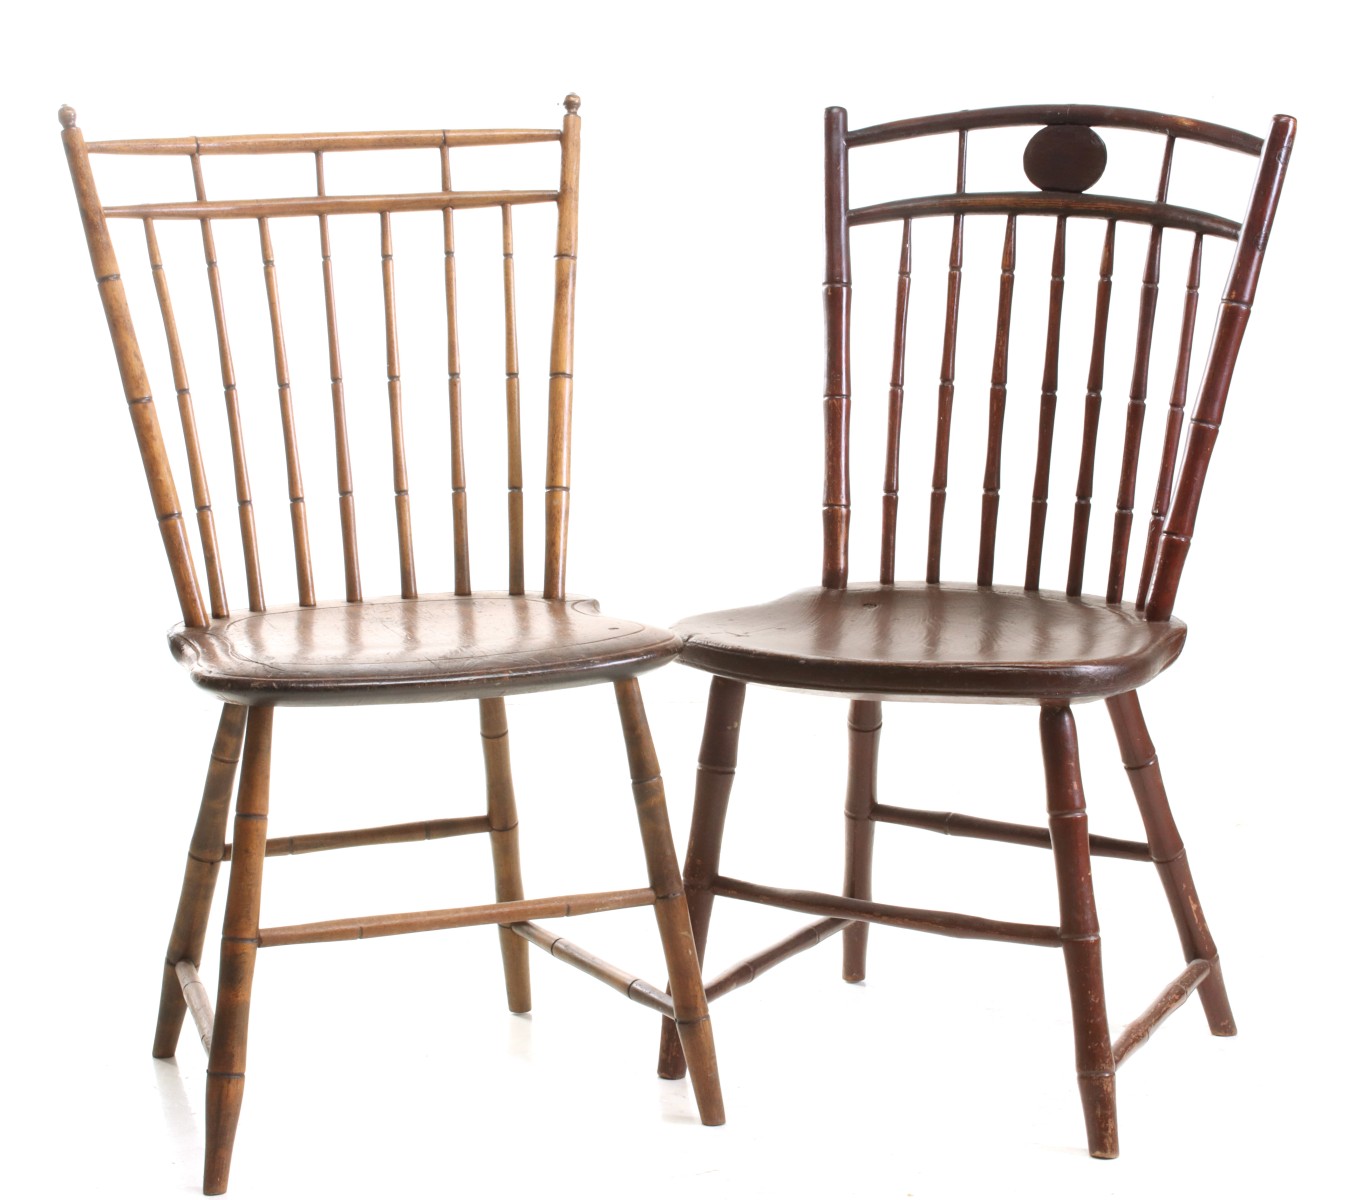 TWO 19TH C. AMERICAN WINDSOR BIRDCAGE CHAIRS